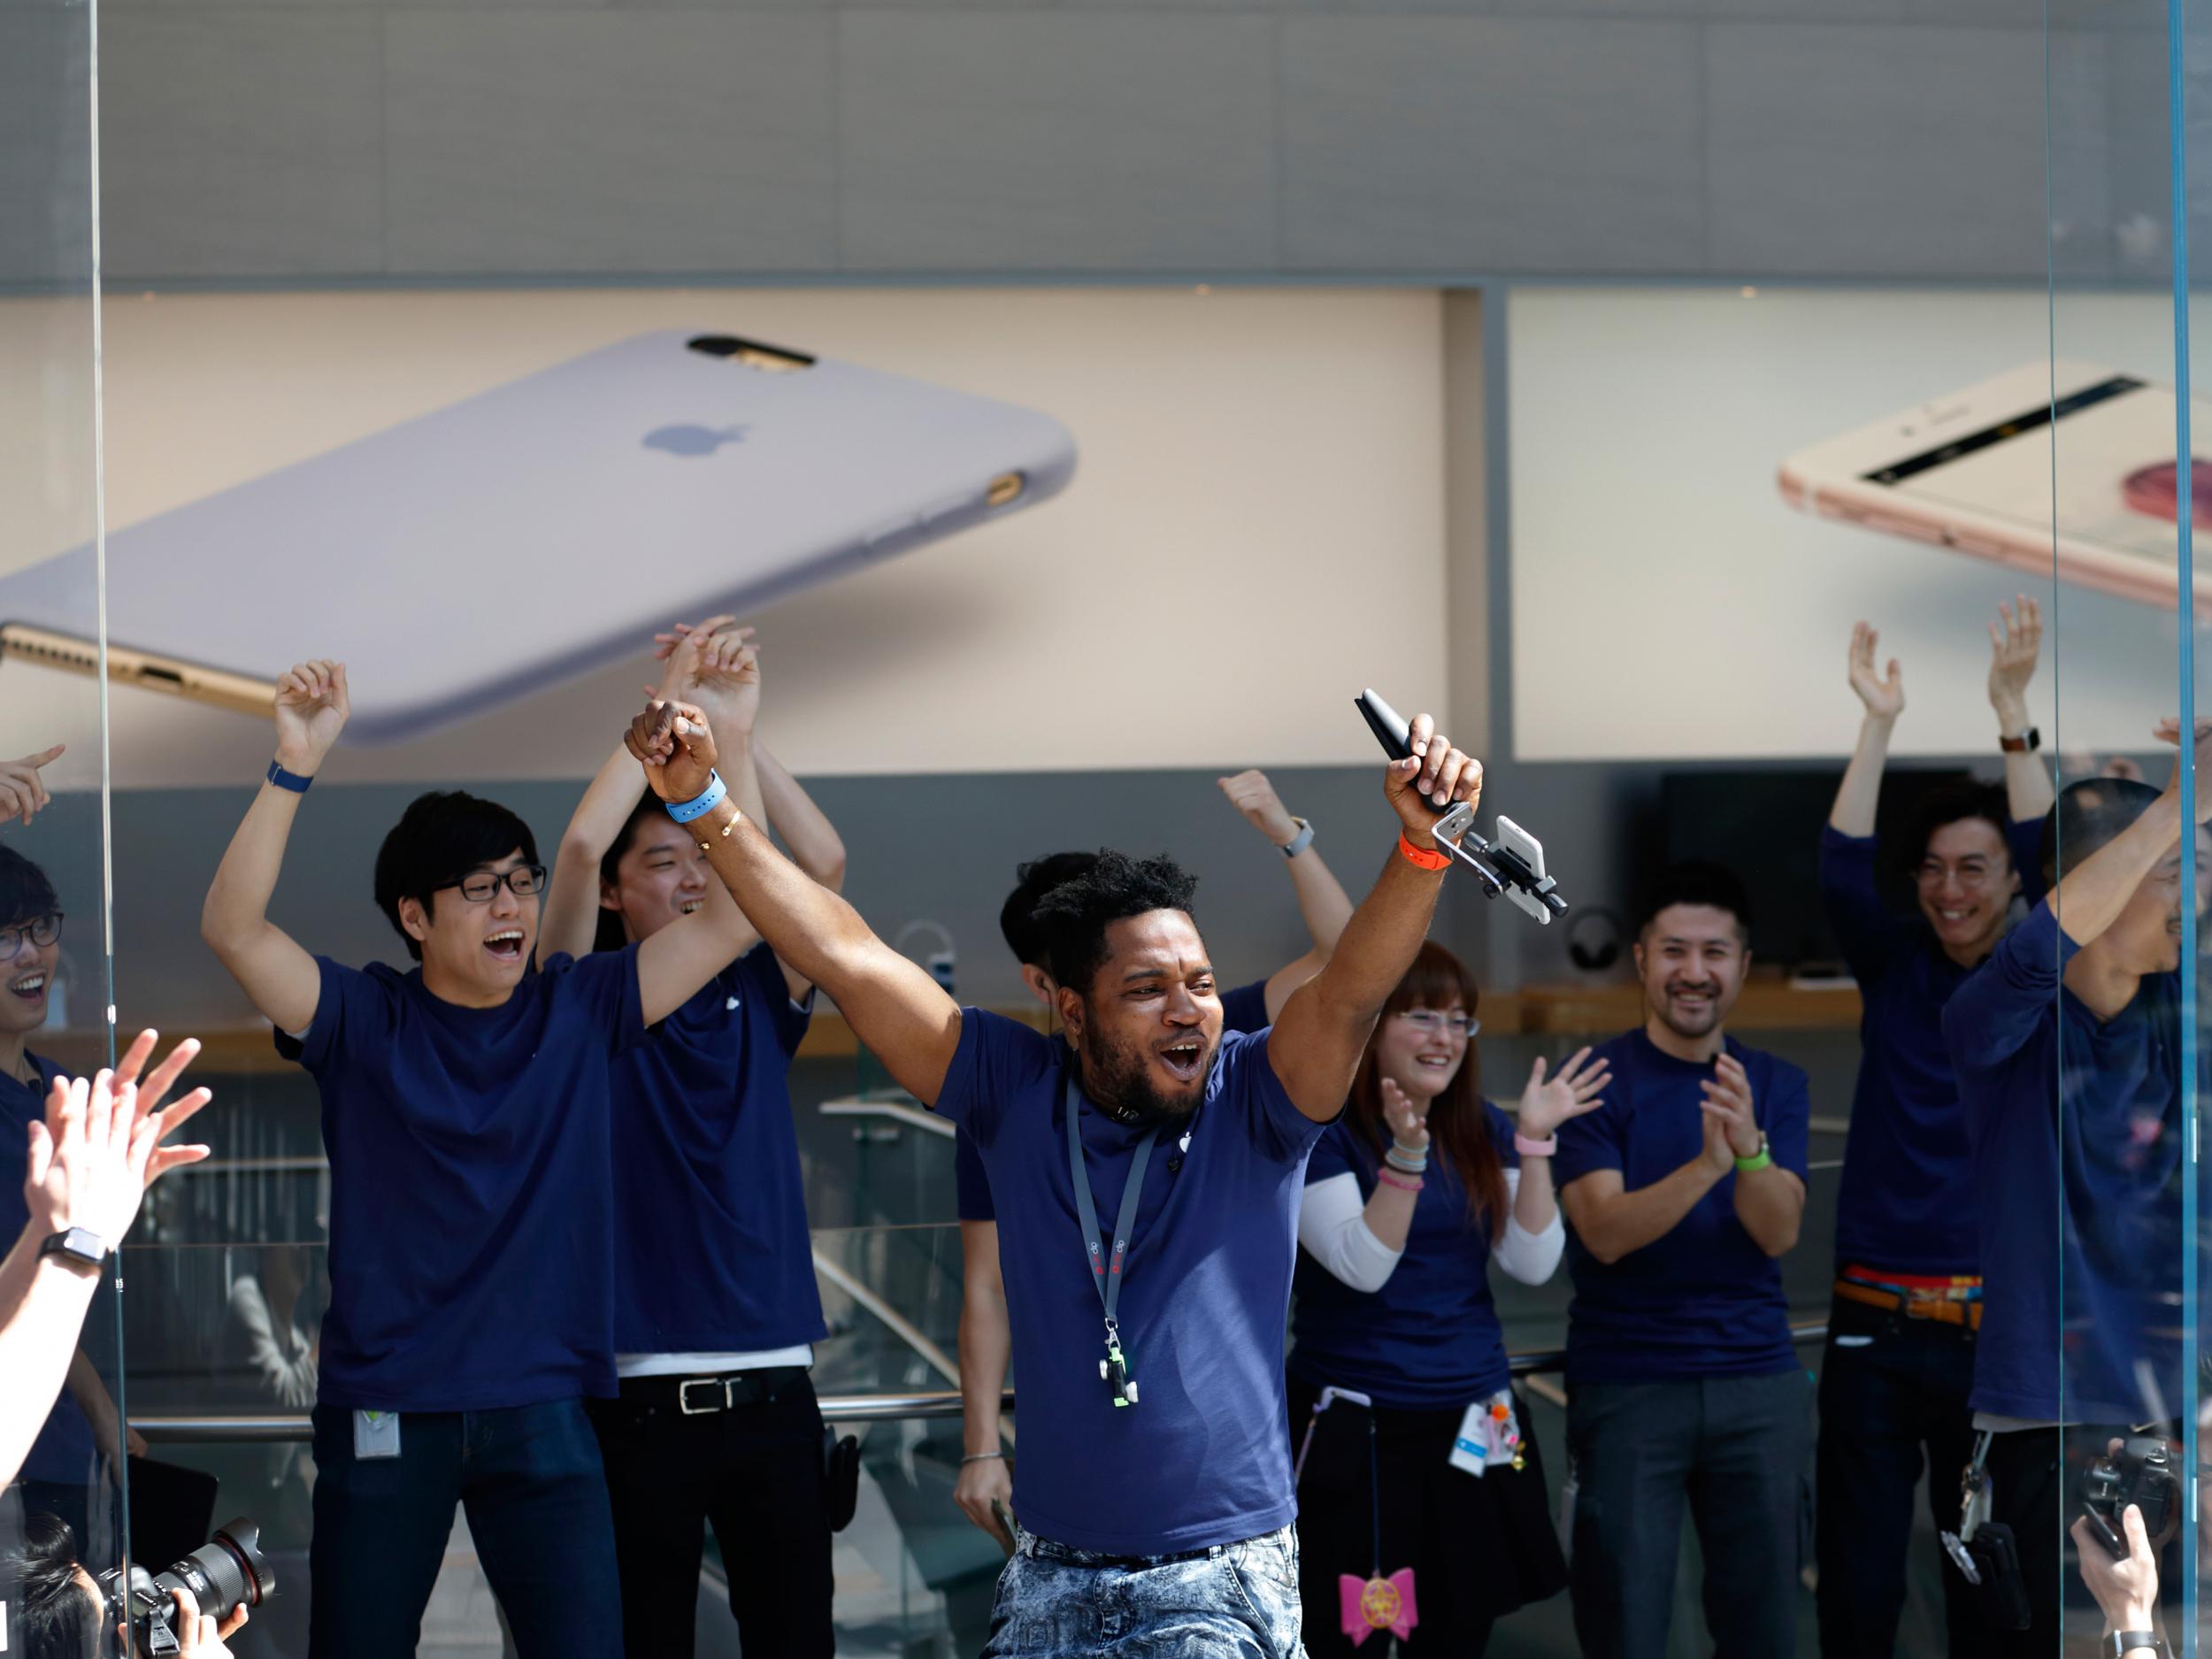 Employees cheer before the launch of Apple Inc. iPhone SE and iPad Pro 9.7 inch at the company's Omotesando store on March 31, 2016 in Tokyo, Japan